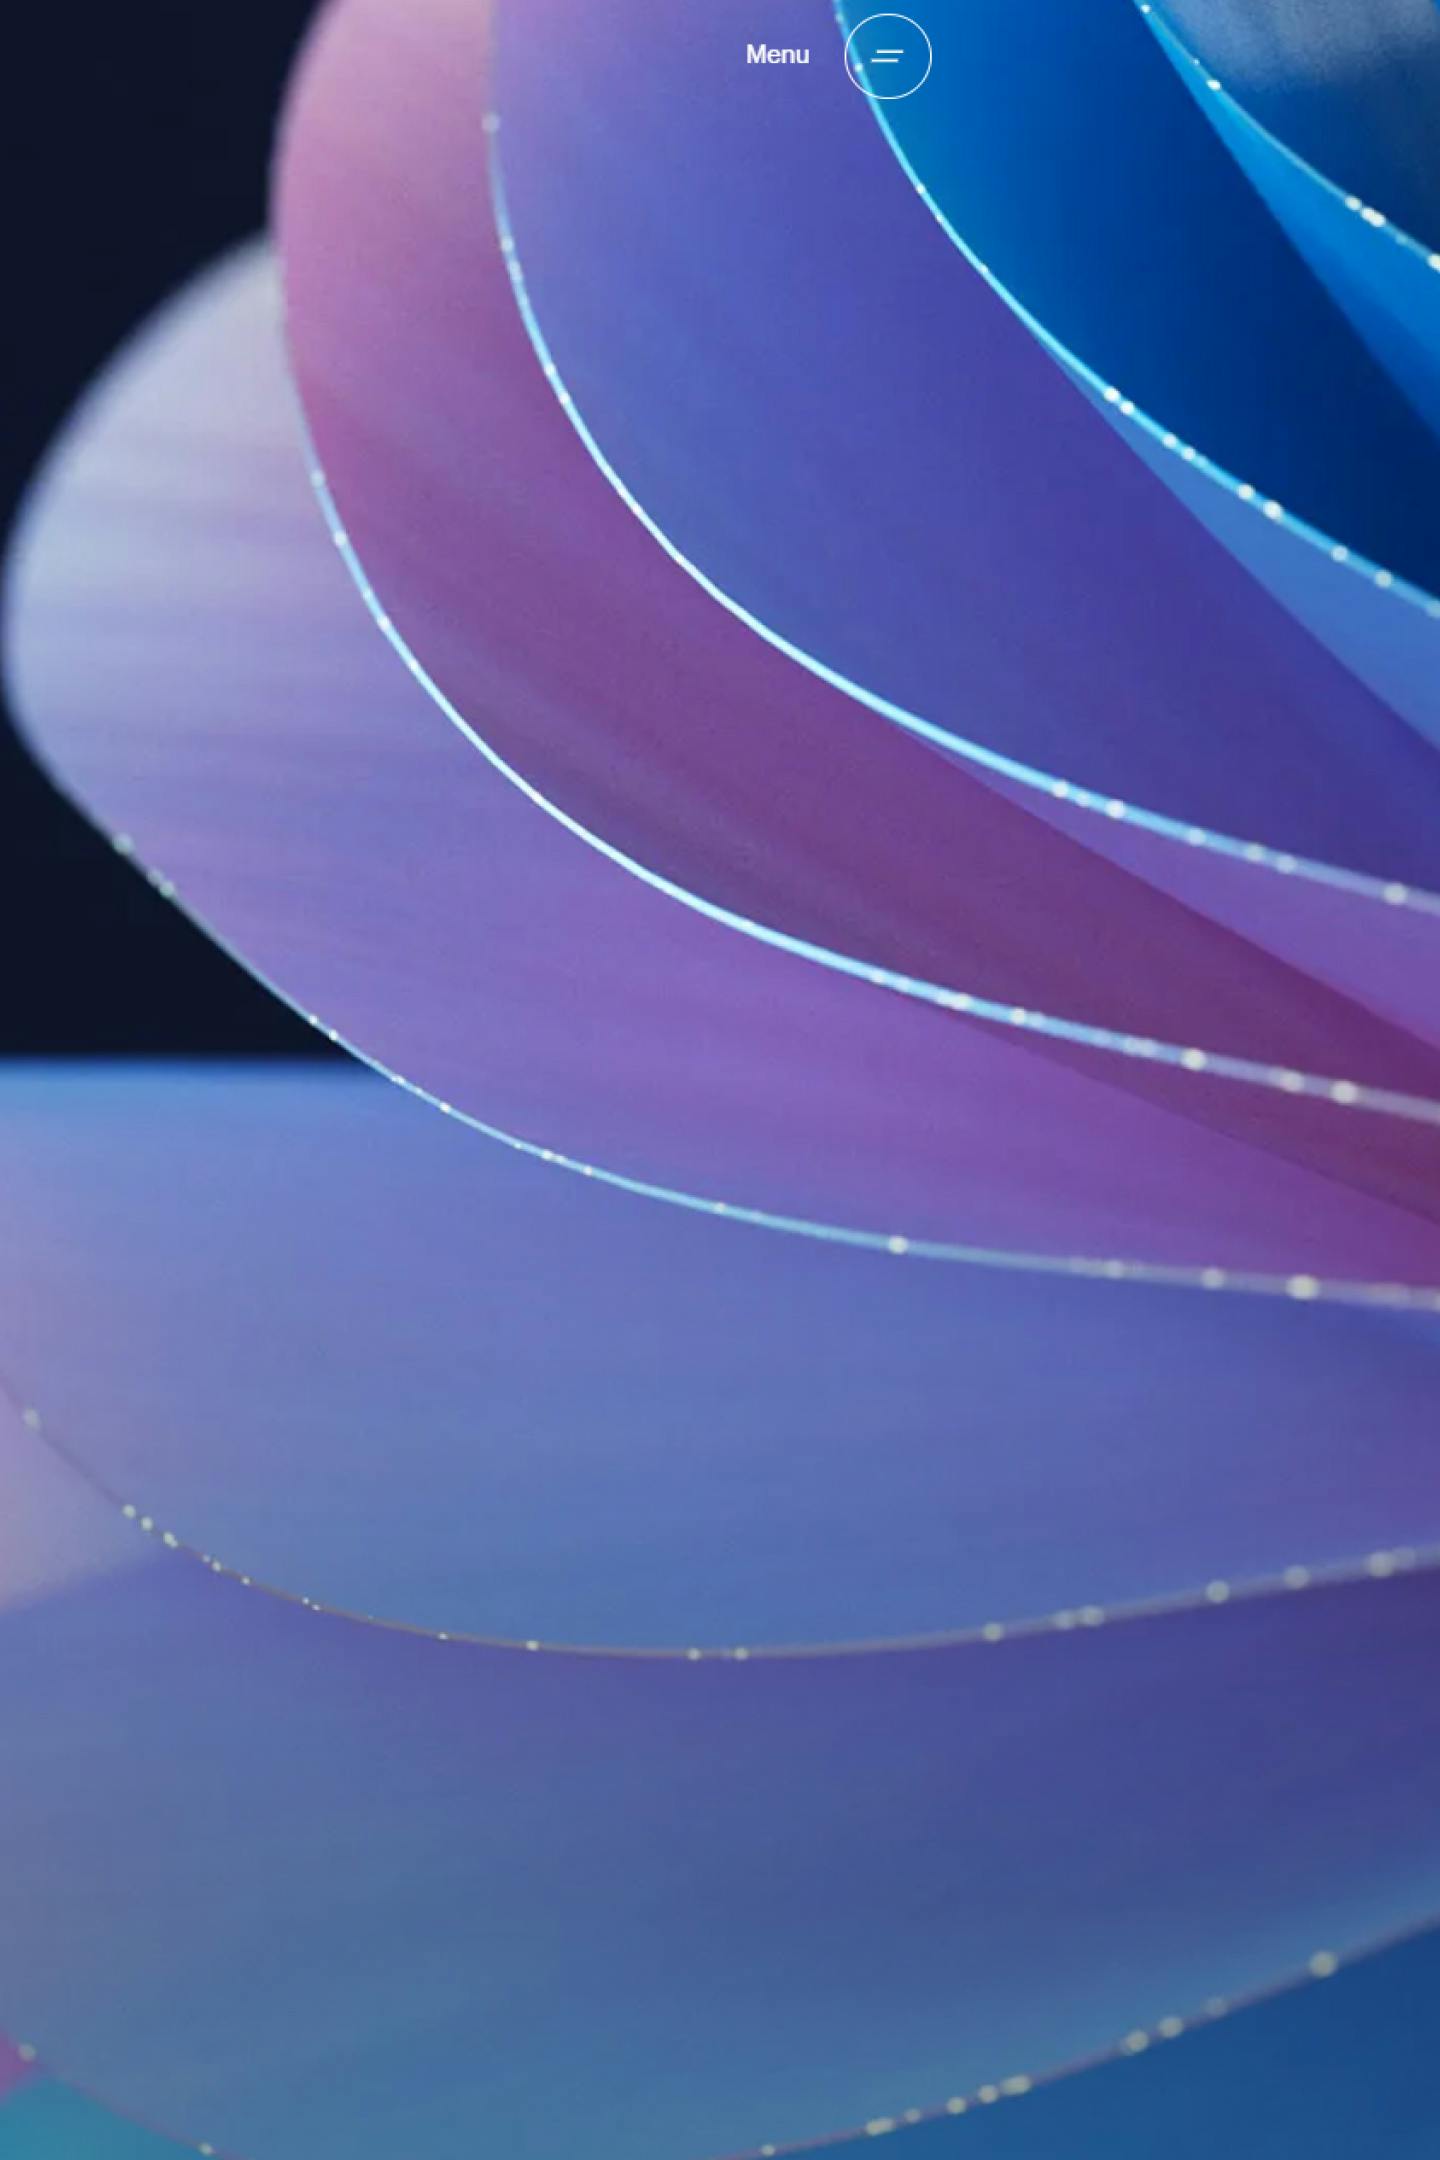 IMage of an abstract set of curved shapes layered vertically with smooth curves in different gradient colours of purple